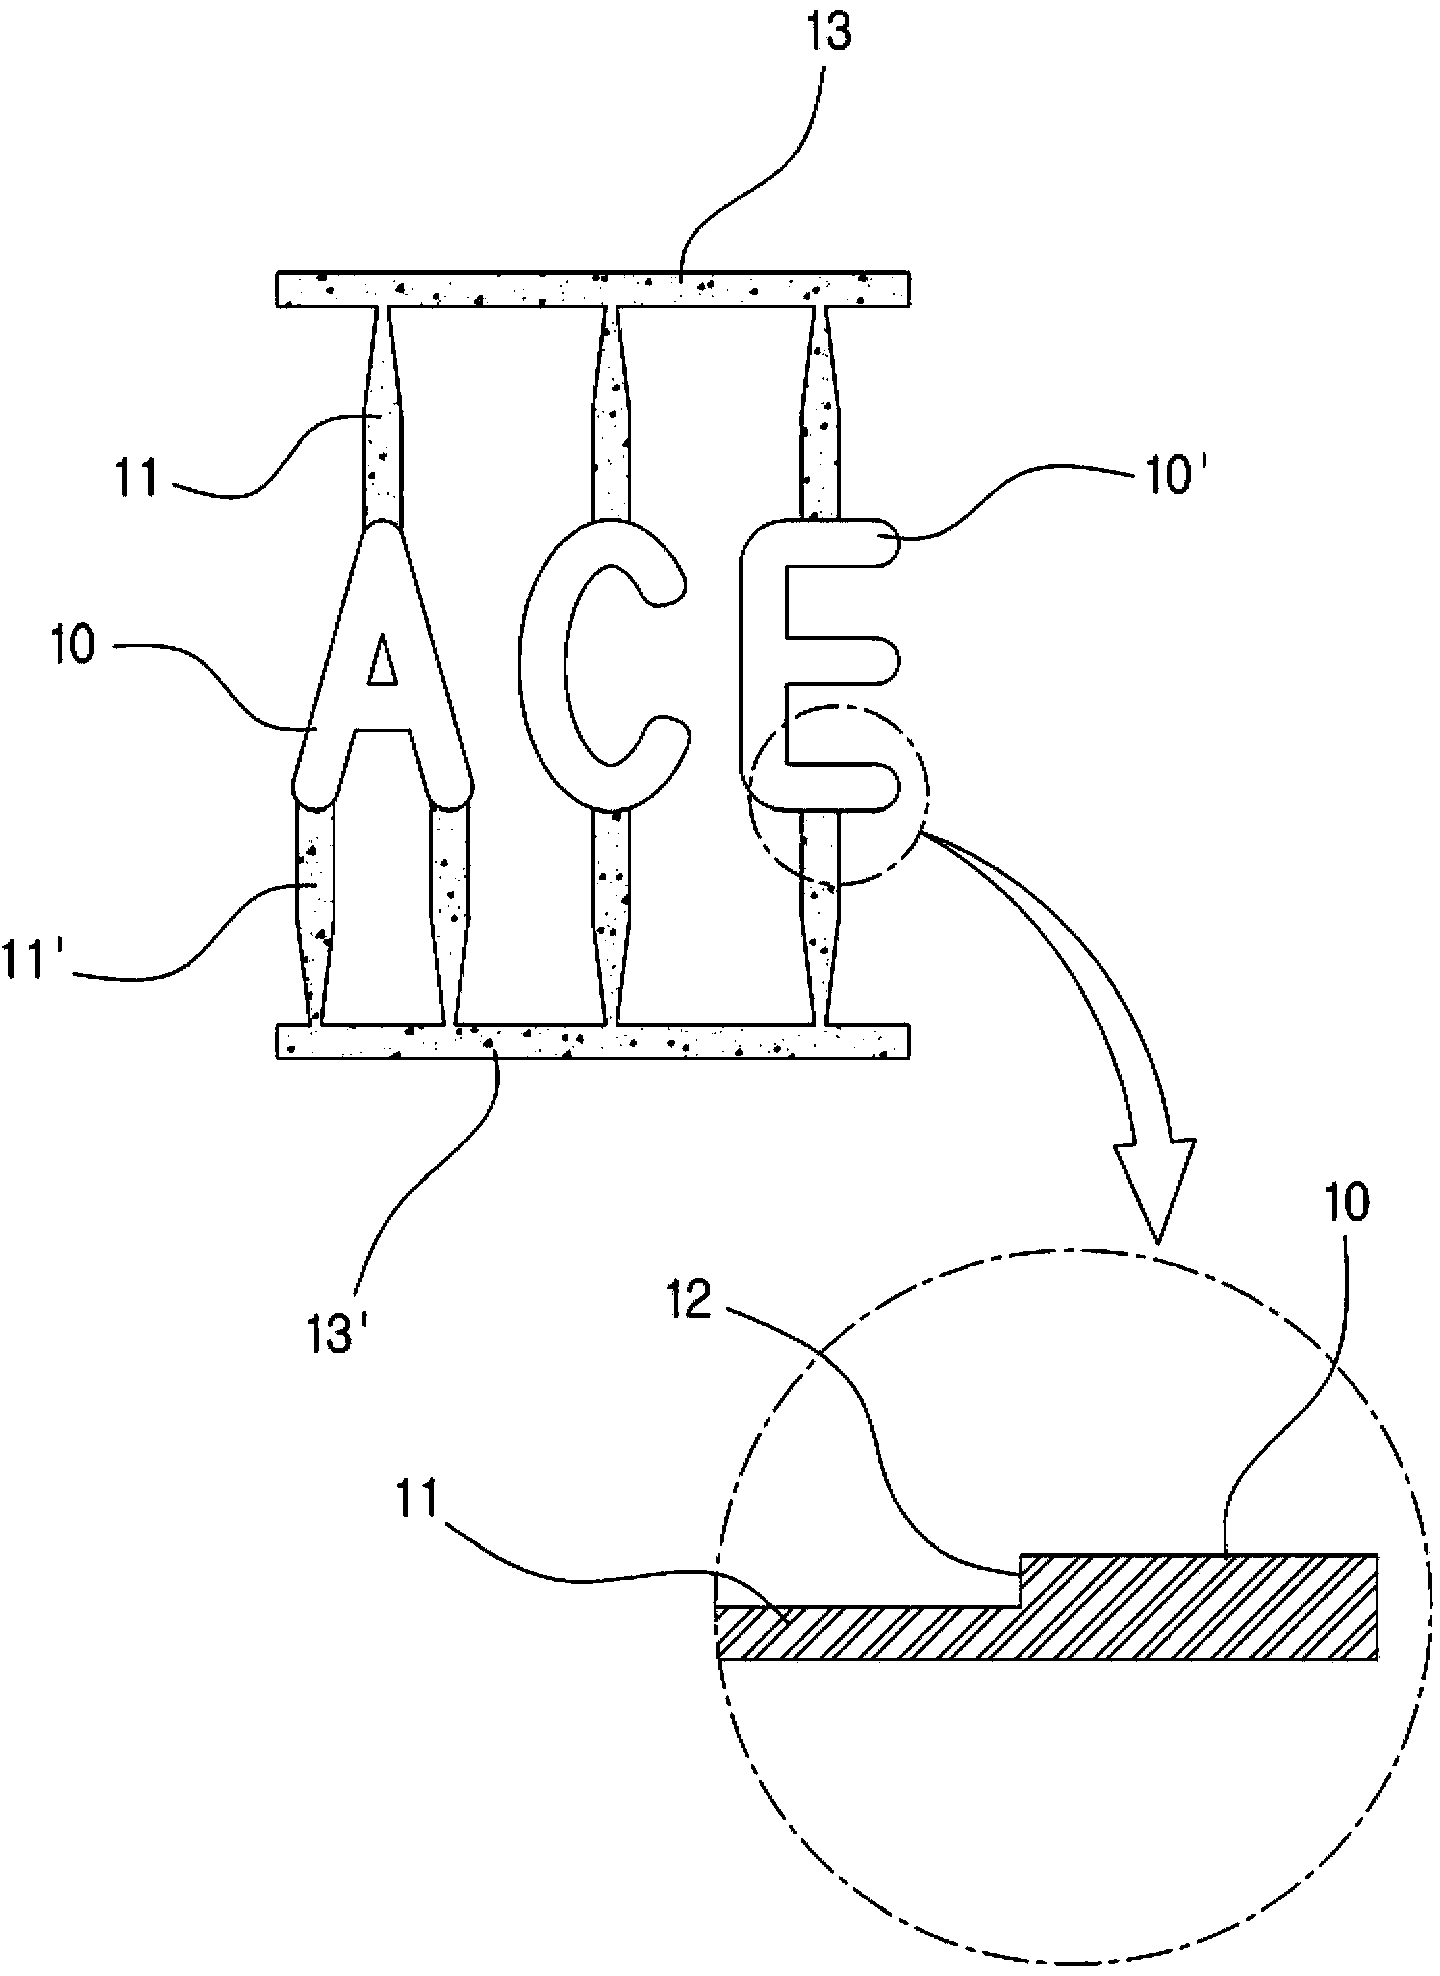 Method for manufacturing and securing metal decorations for products